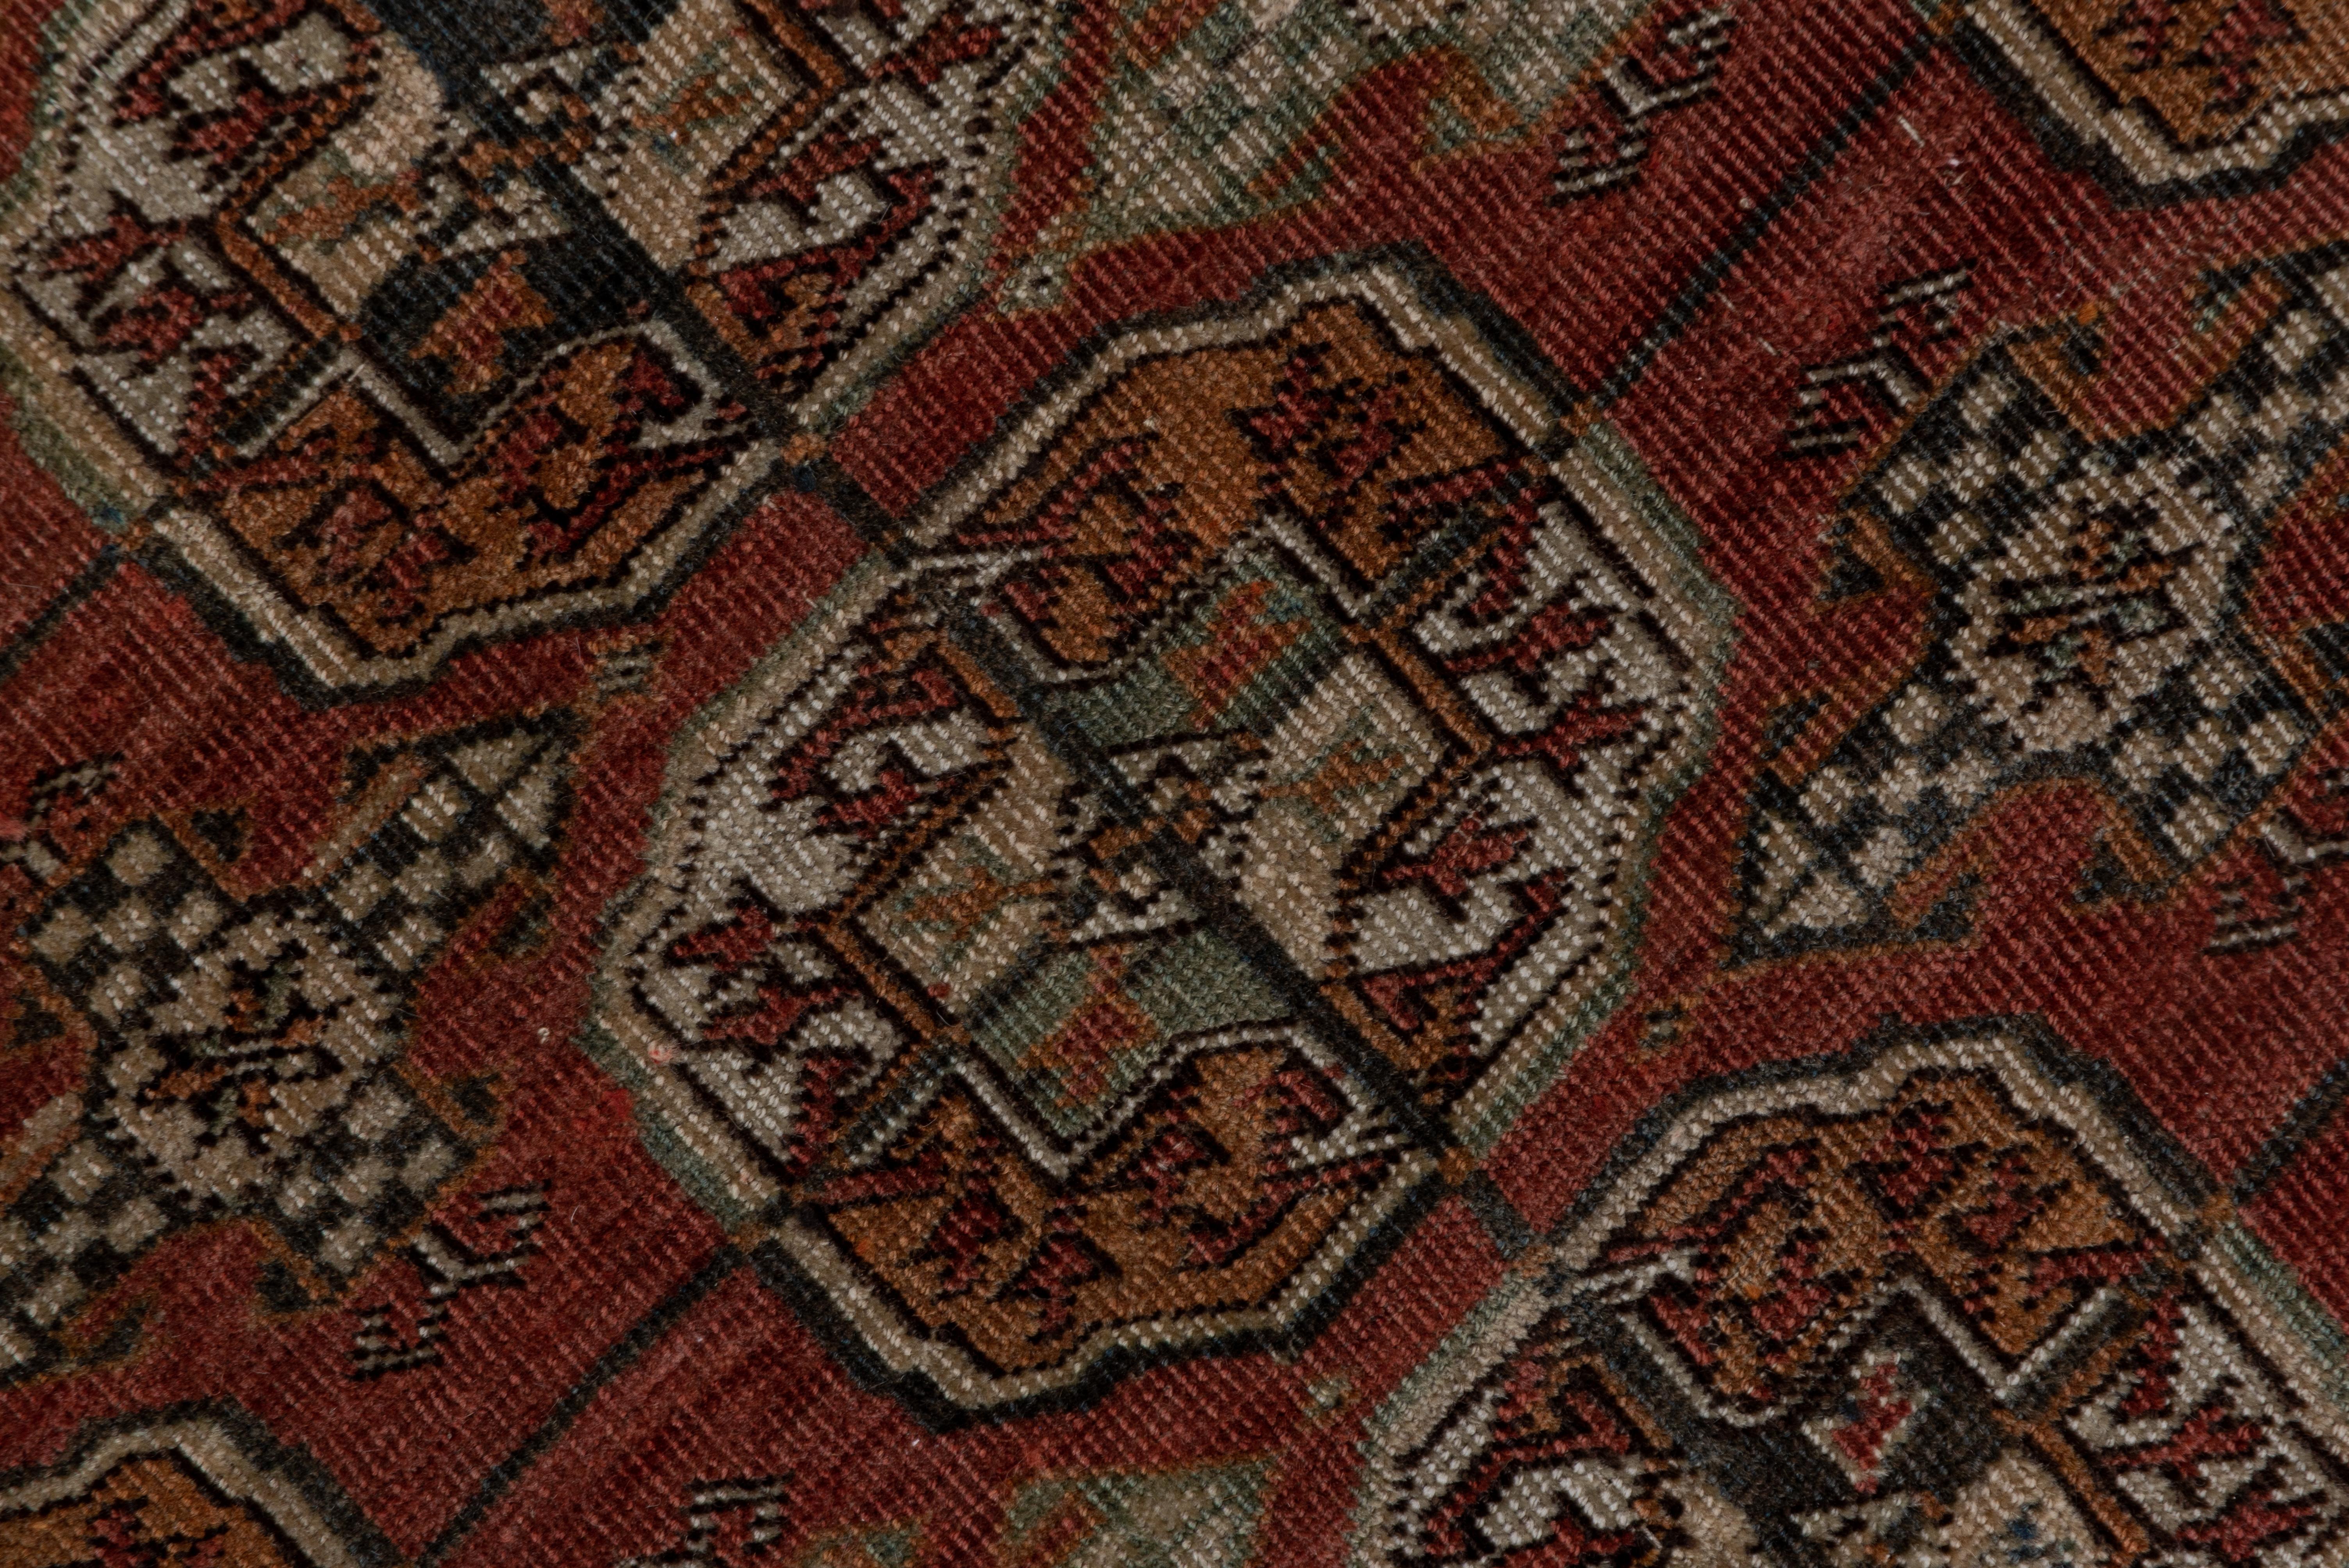 This Tekke Turkmen main carpet shows five columns of characteristic quartered guls on the red field with cruciform Kurbaghe minor guls between. The cross-centred border octagons are densely rayed. At each end is a broad panel with a rayed double